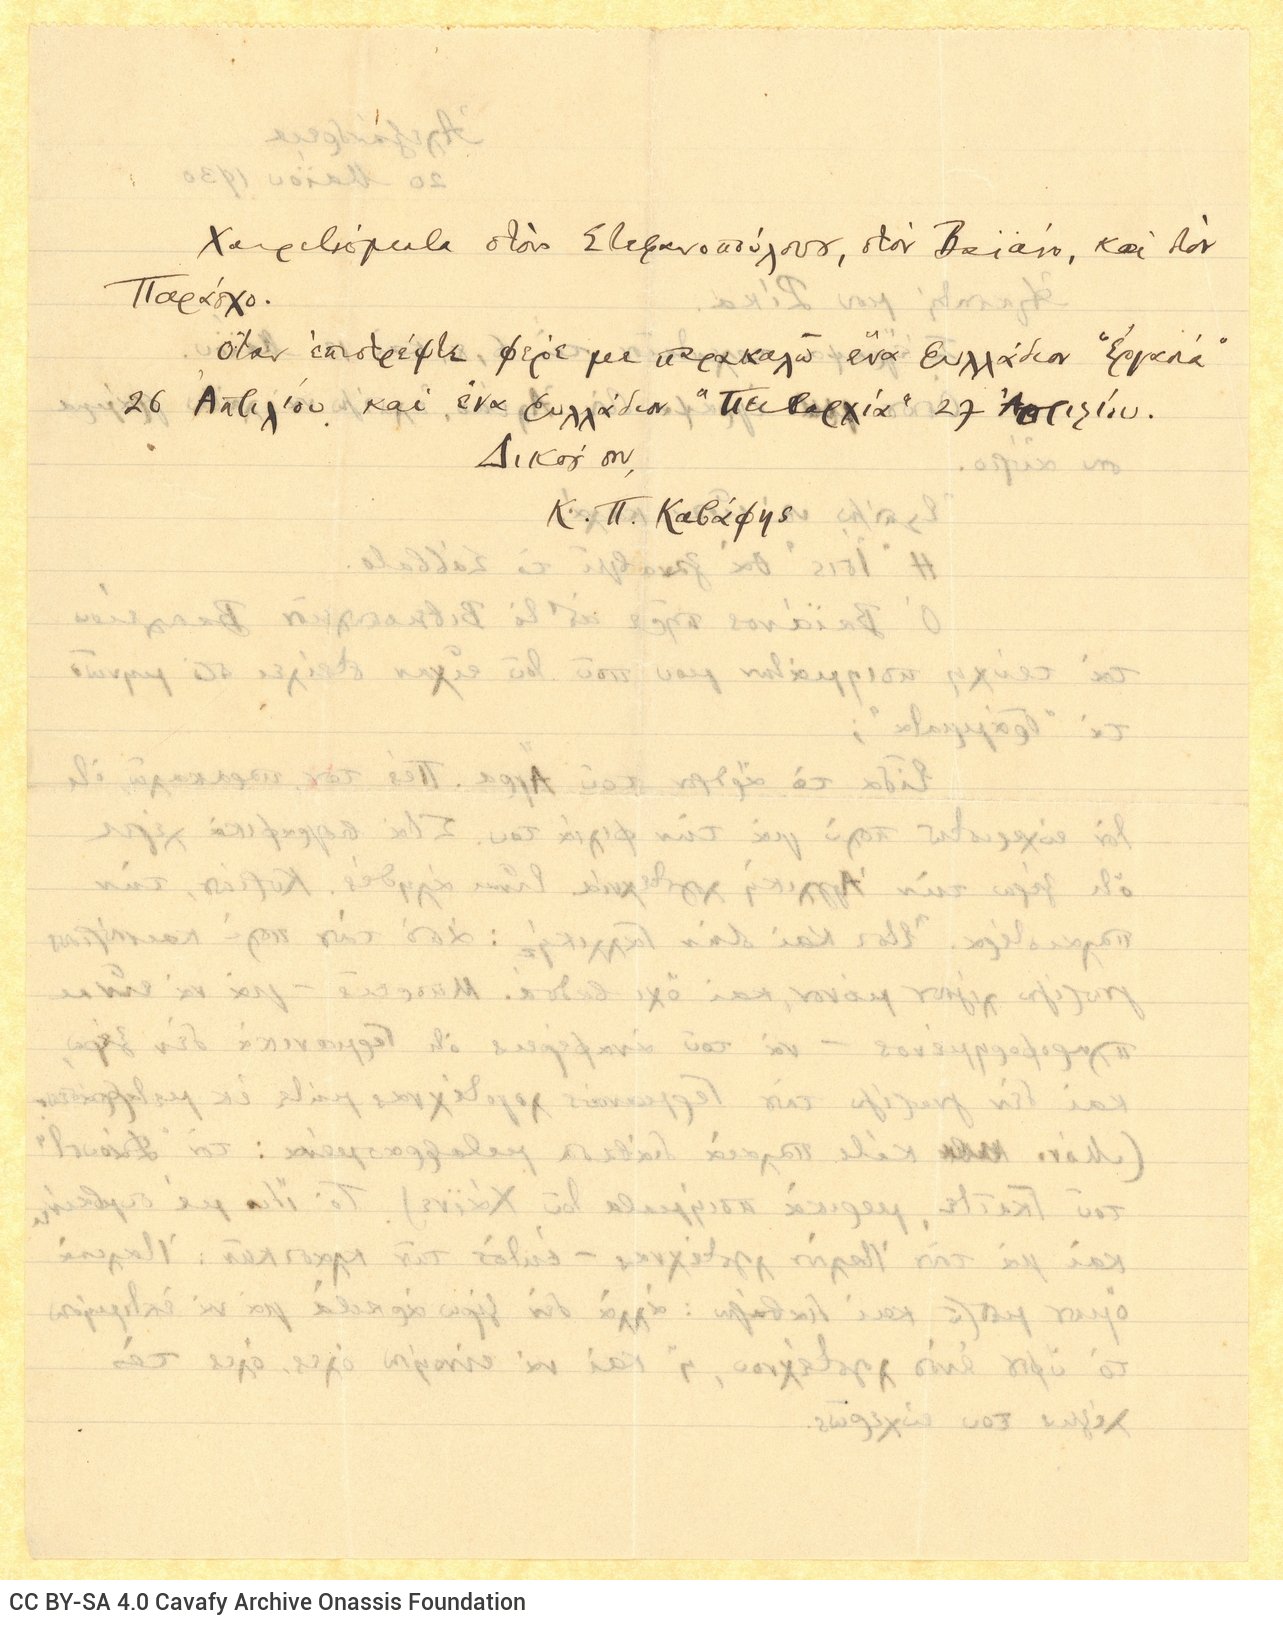 Handwritten letter by Cavafy to Rica [Singopoulo] on both sides of a ruled sheet. The poet refers extensively to an article a